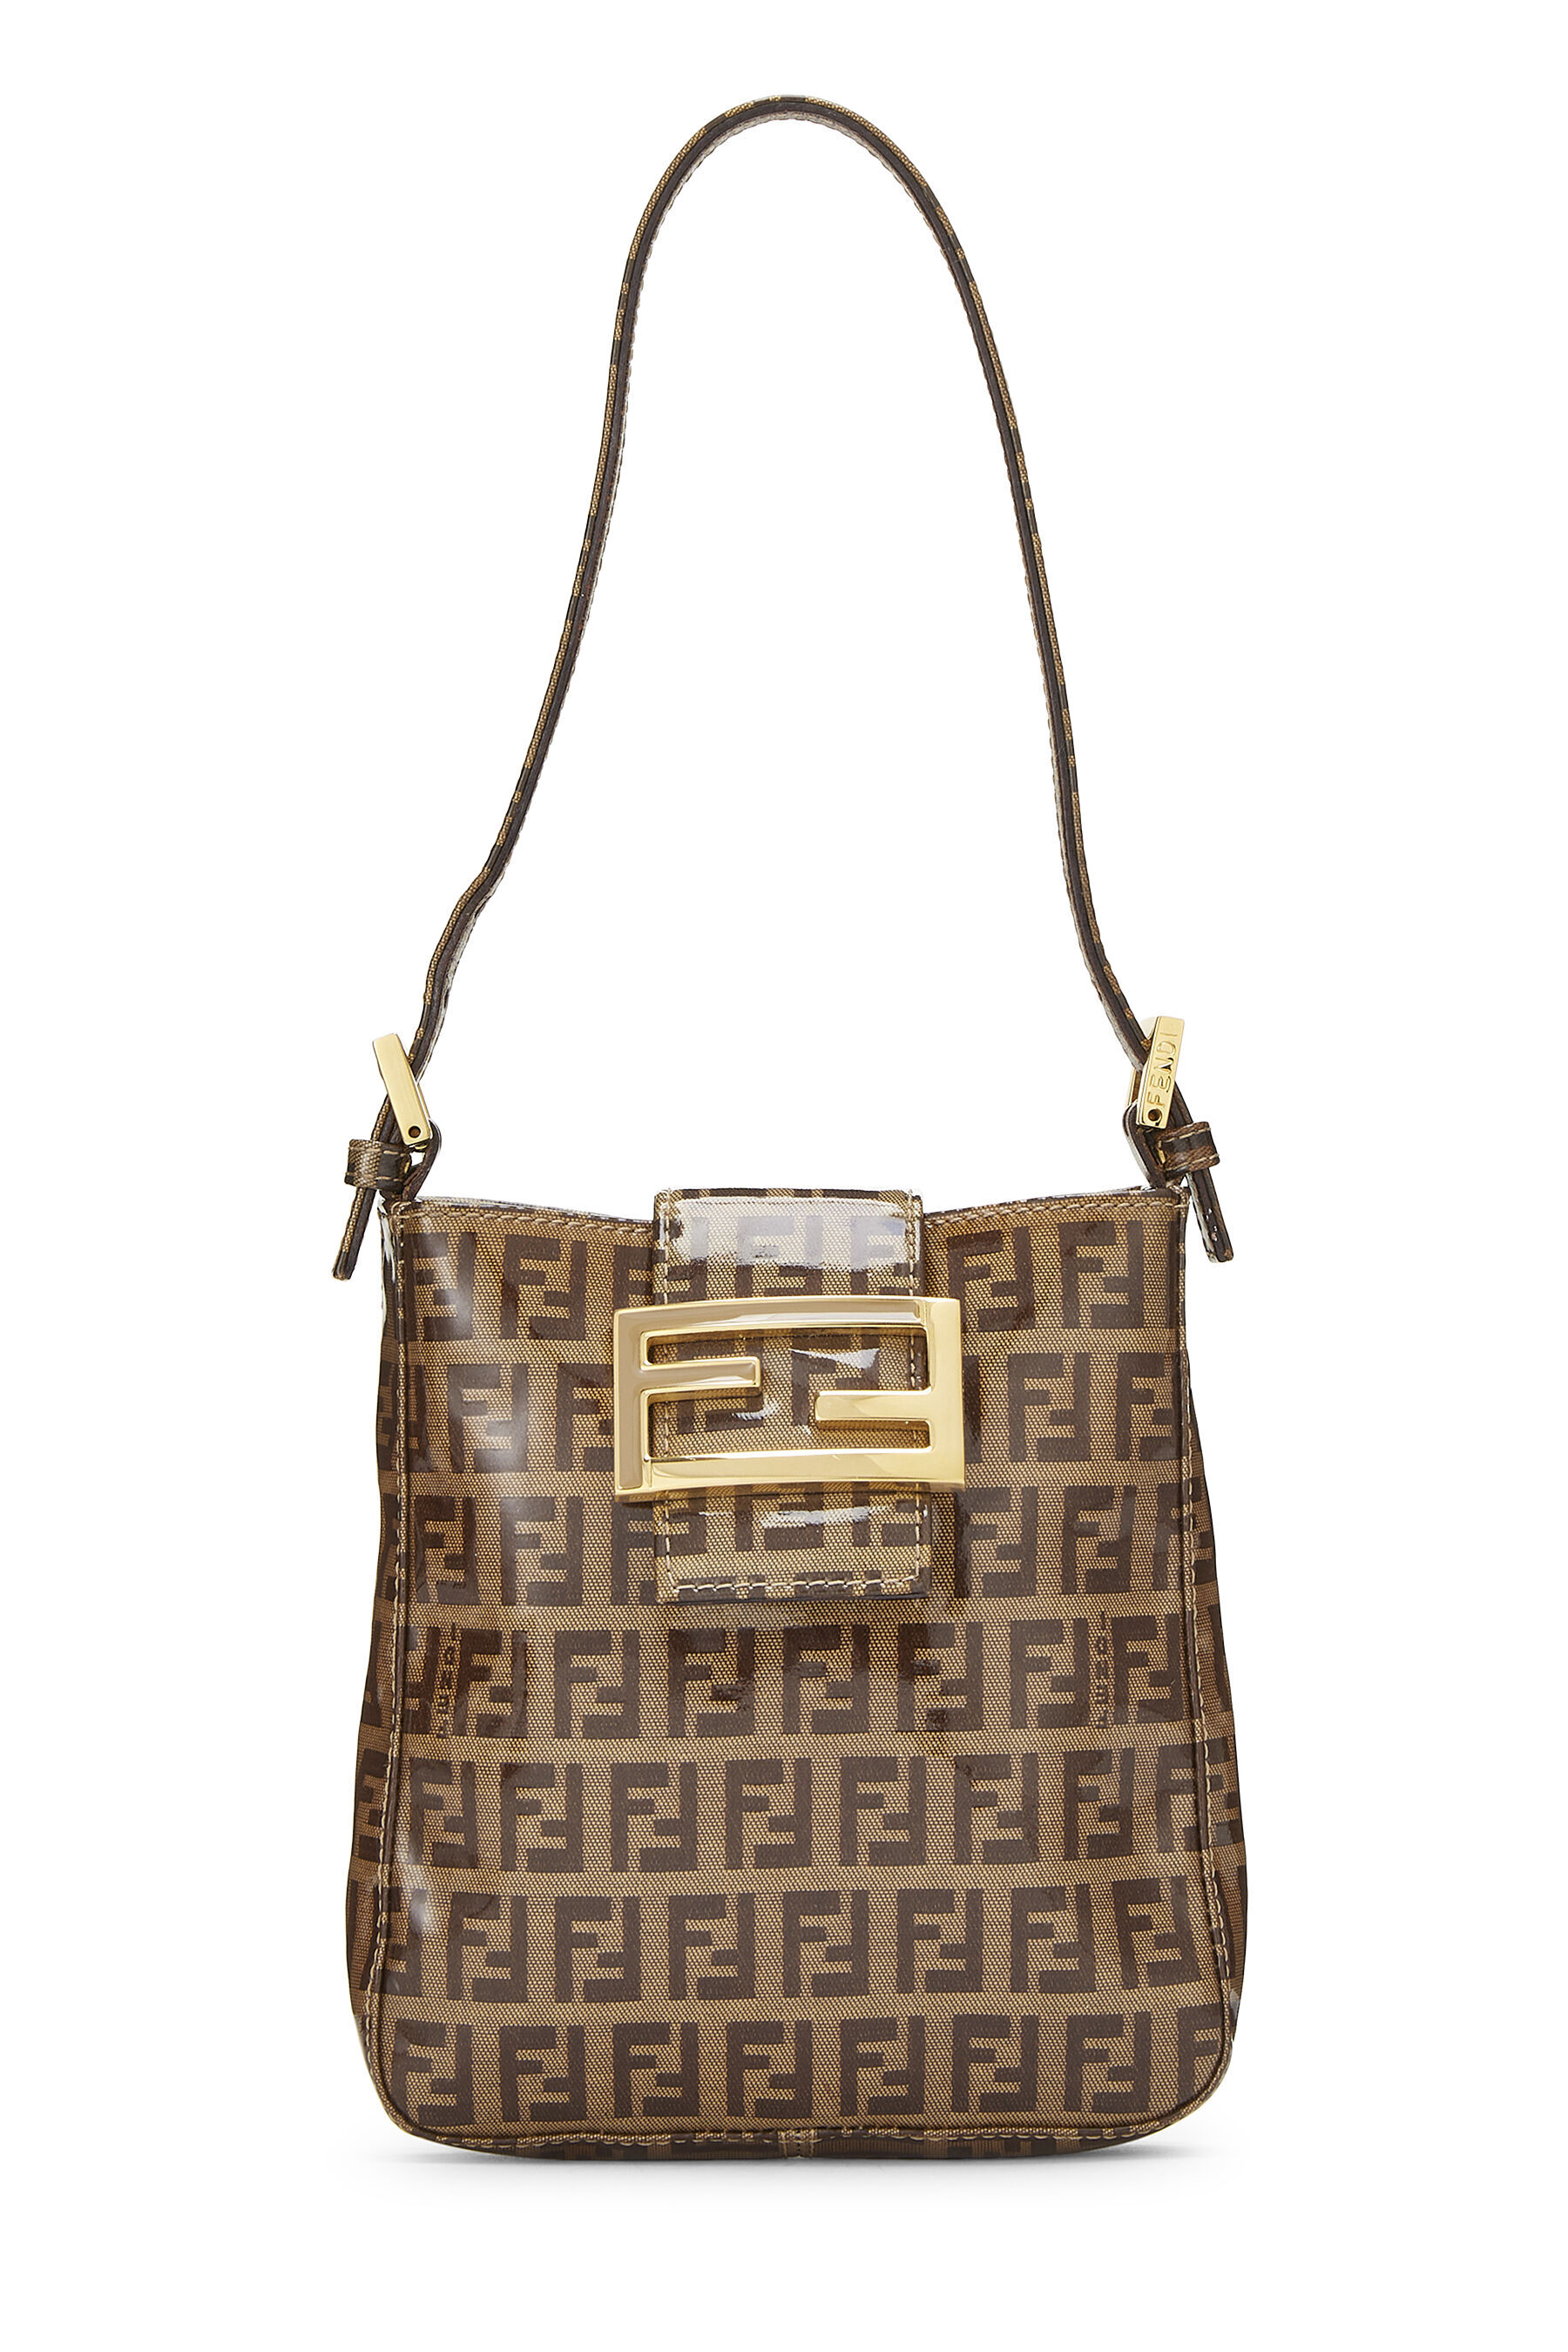 How to tell if a Fendi bag is fake - Quora